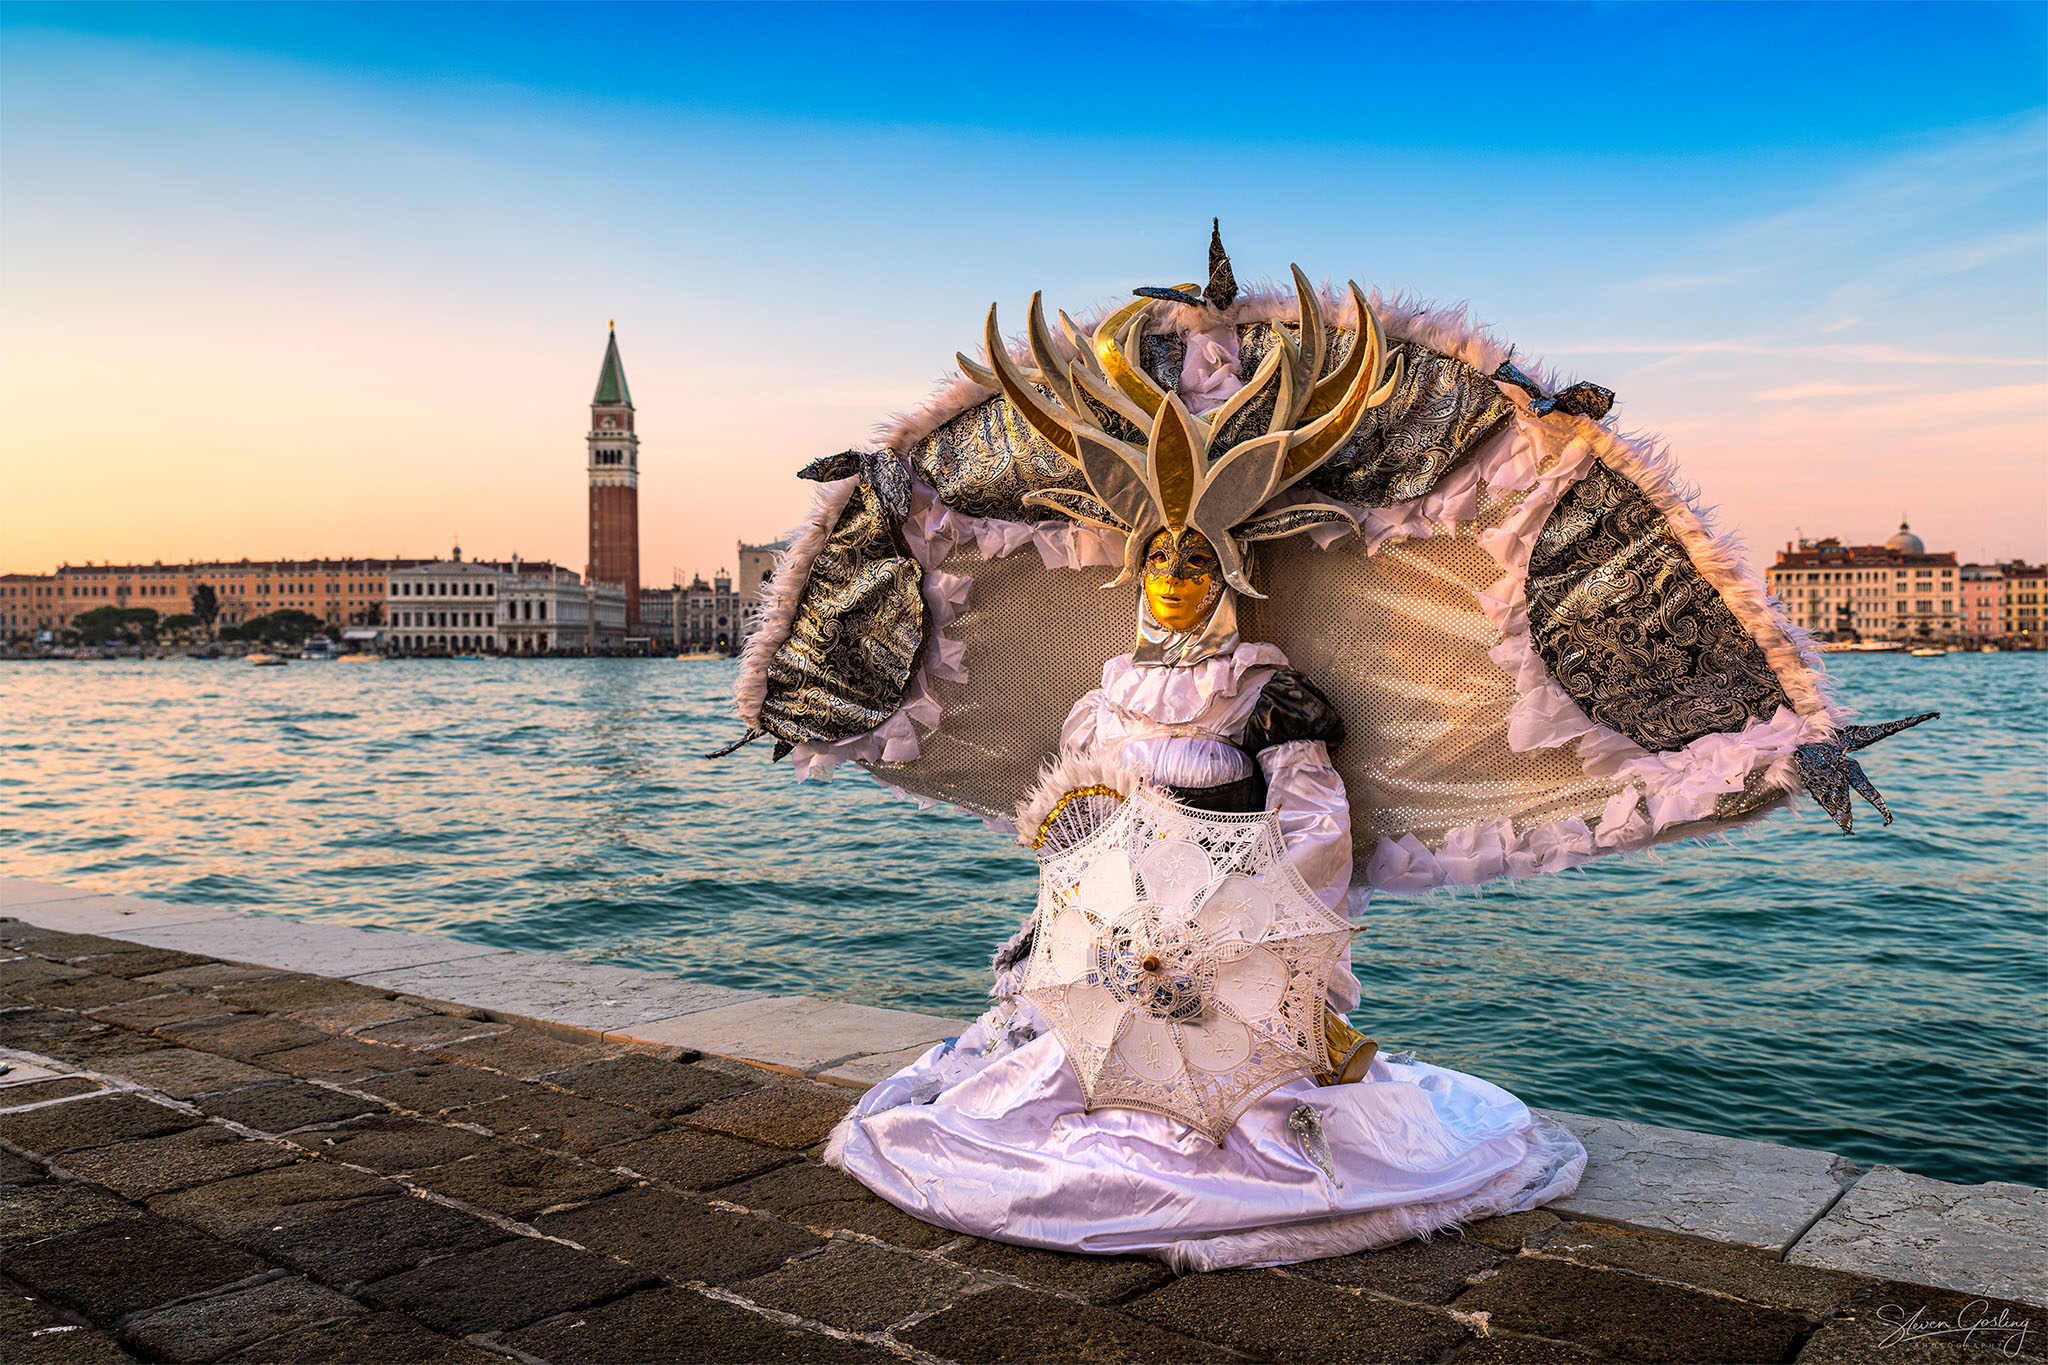 Ballet & Ball Gowns Photography Workshop at the Venice Carnival 158